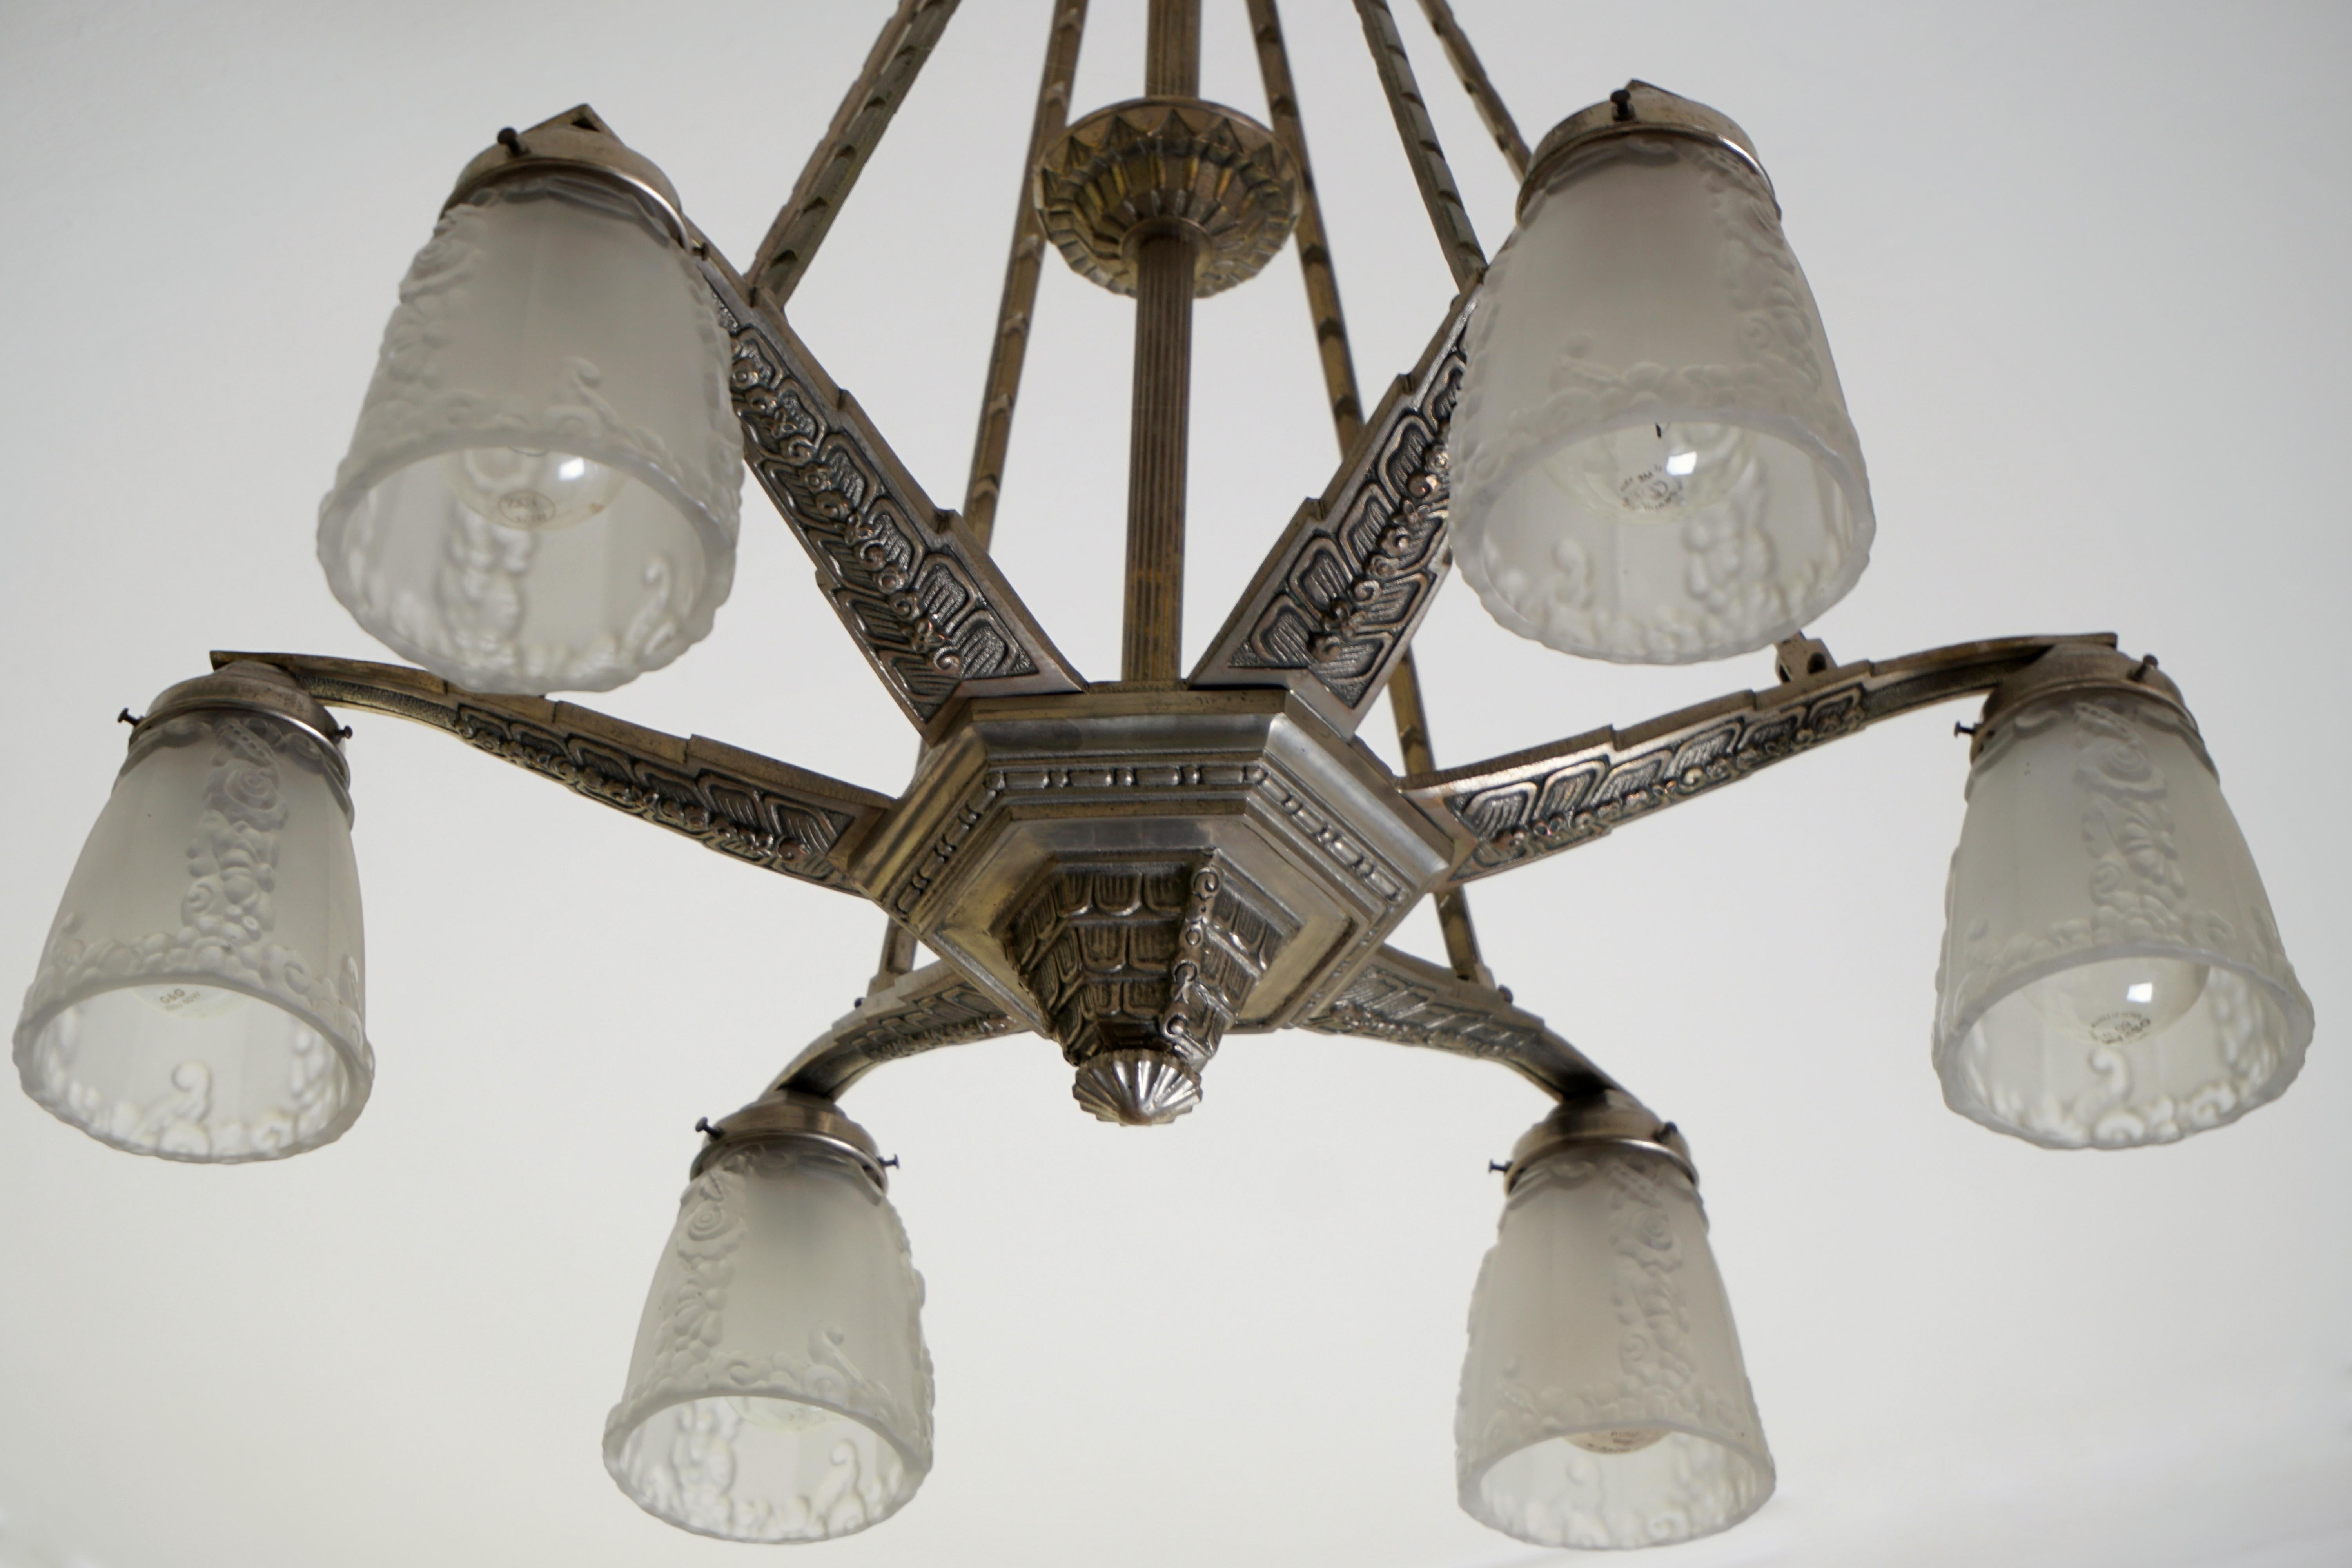 A very nice detailed Art Deco French Starfish chandelier attributed to Hettier Vincent.
With its archaic ornamentical Finnish a beautiful missing link between art nouveau and Art Deco.